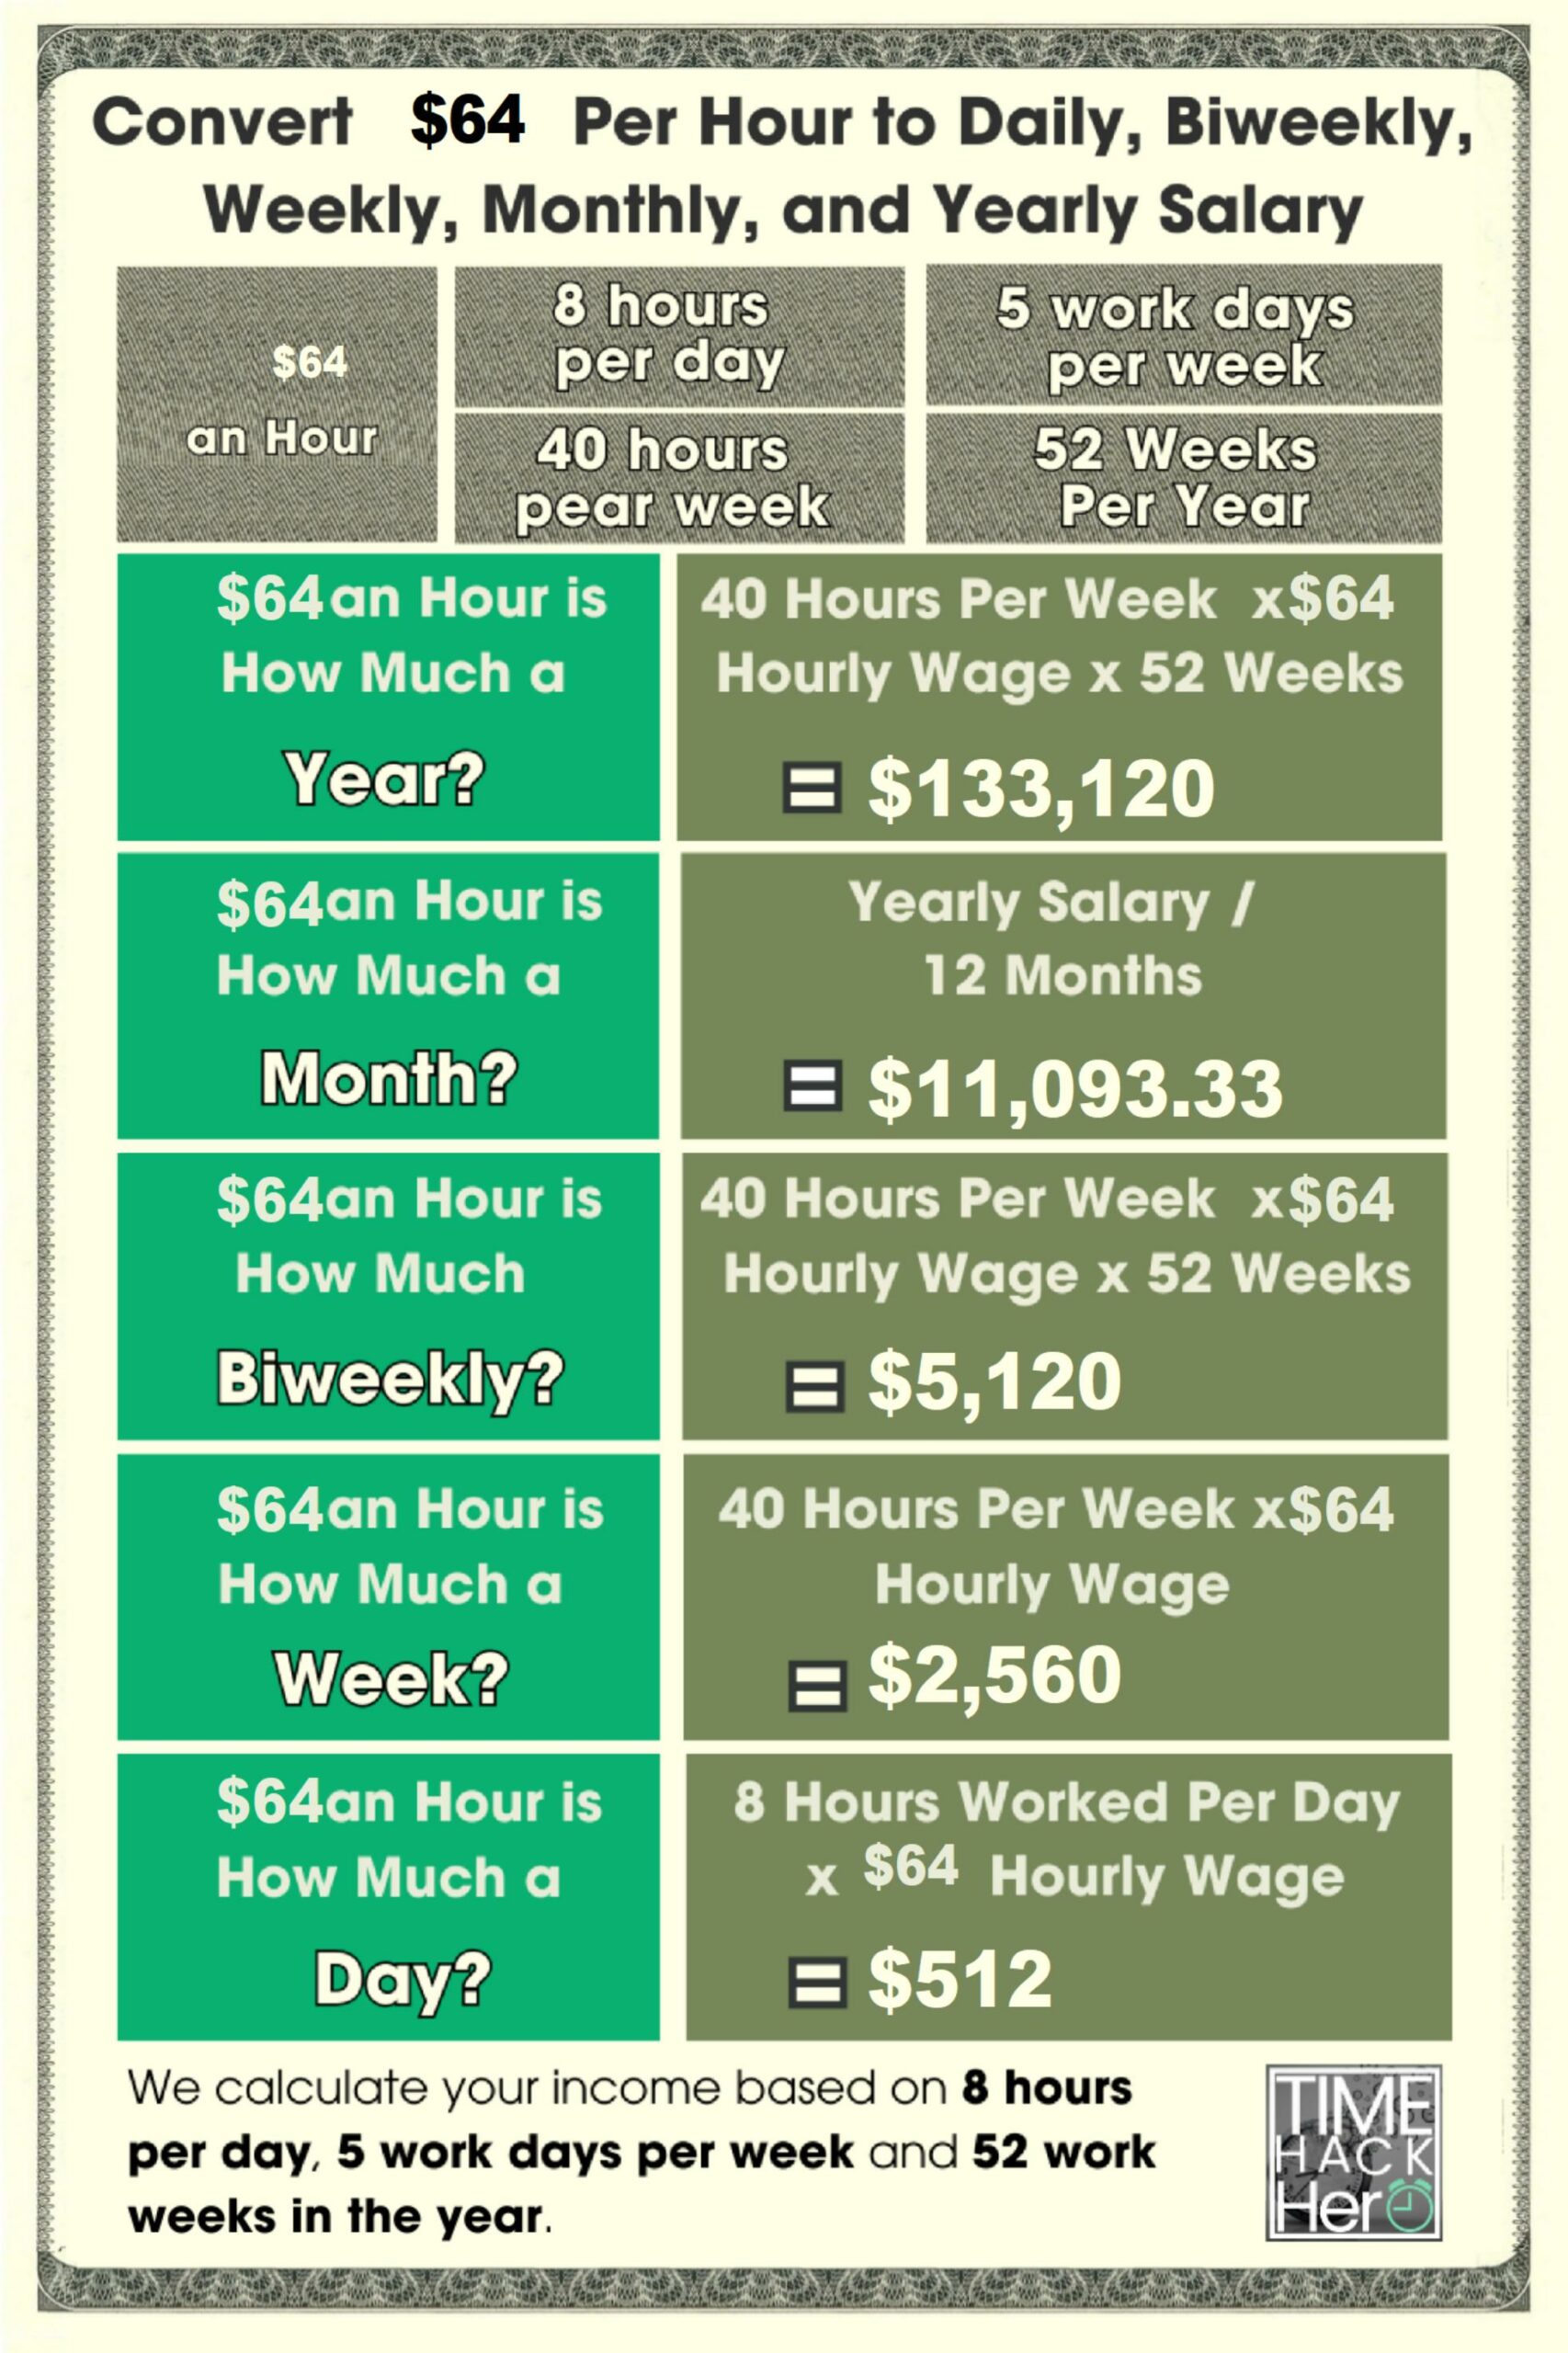 Convert $64 Per Hour to Weekly, Monthly, and Yearly Salary